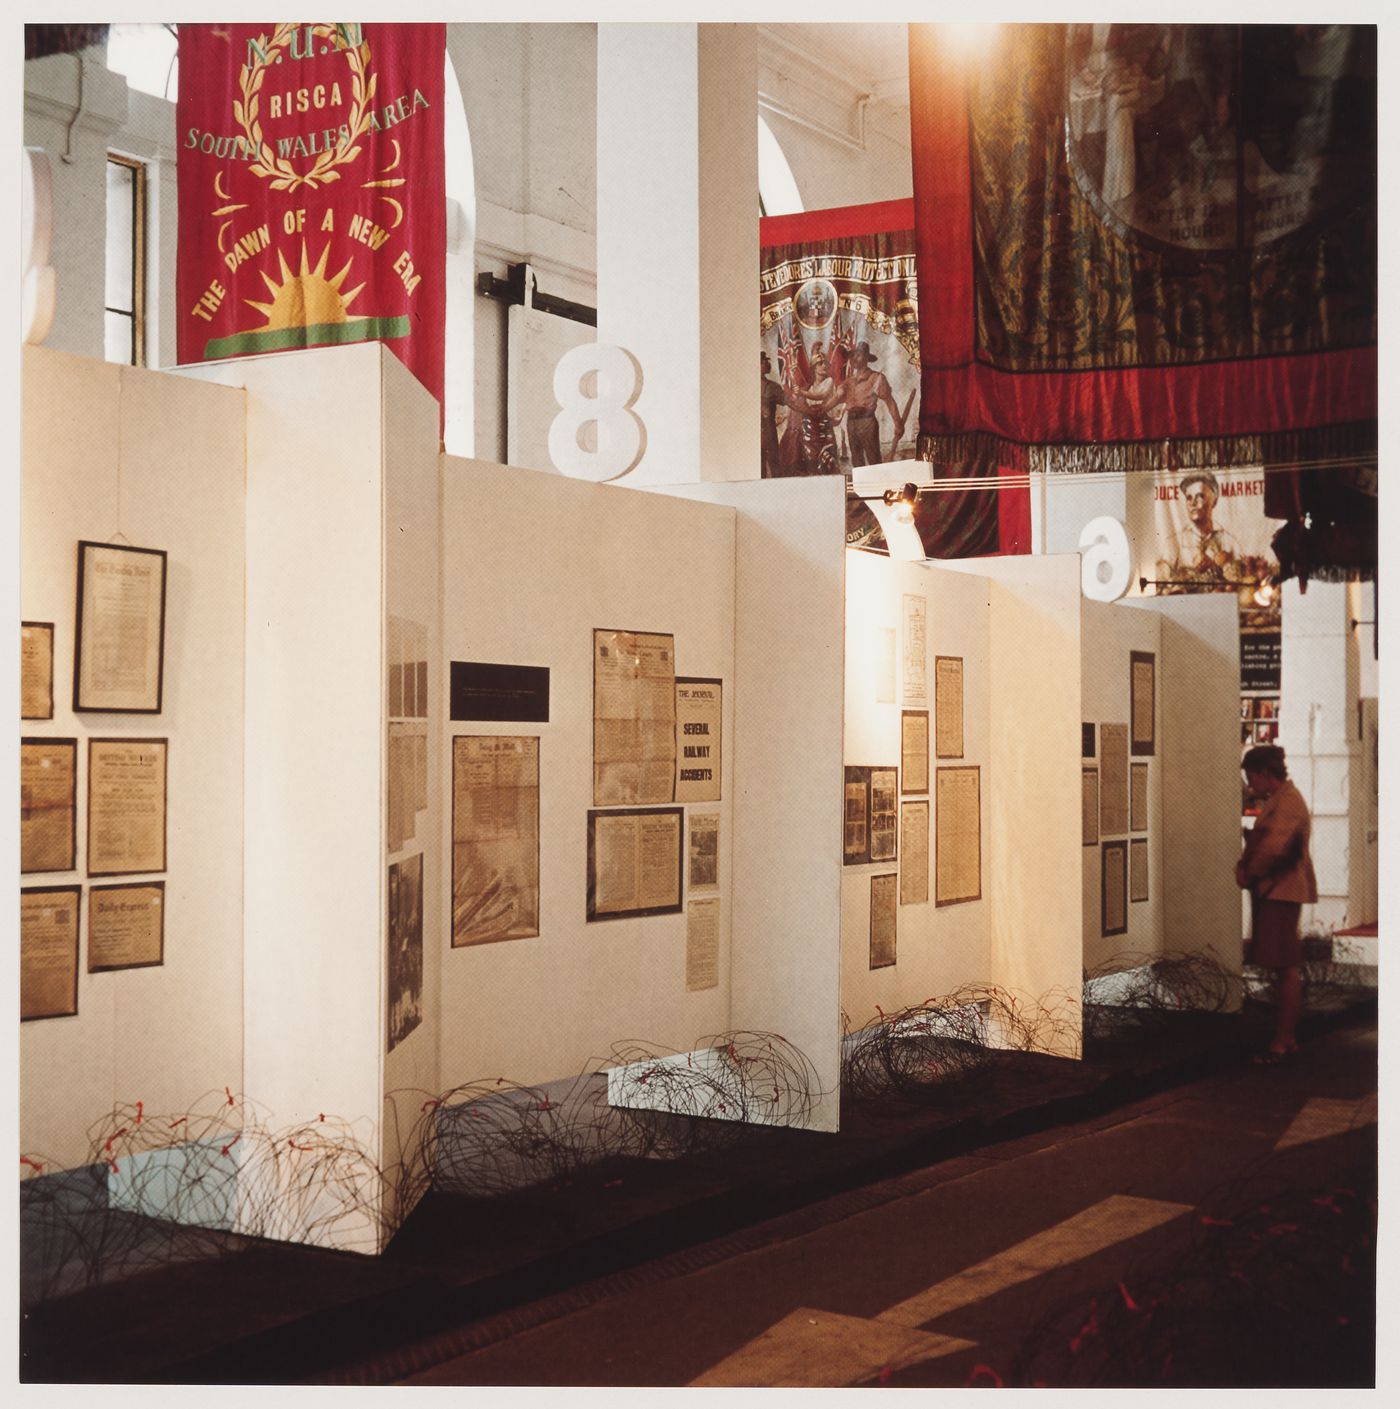 Strike: view of exhibition